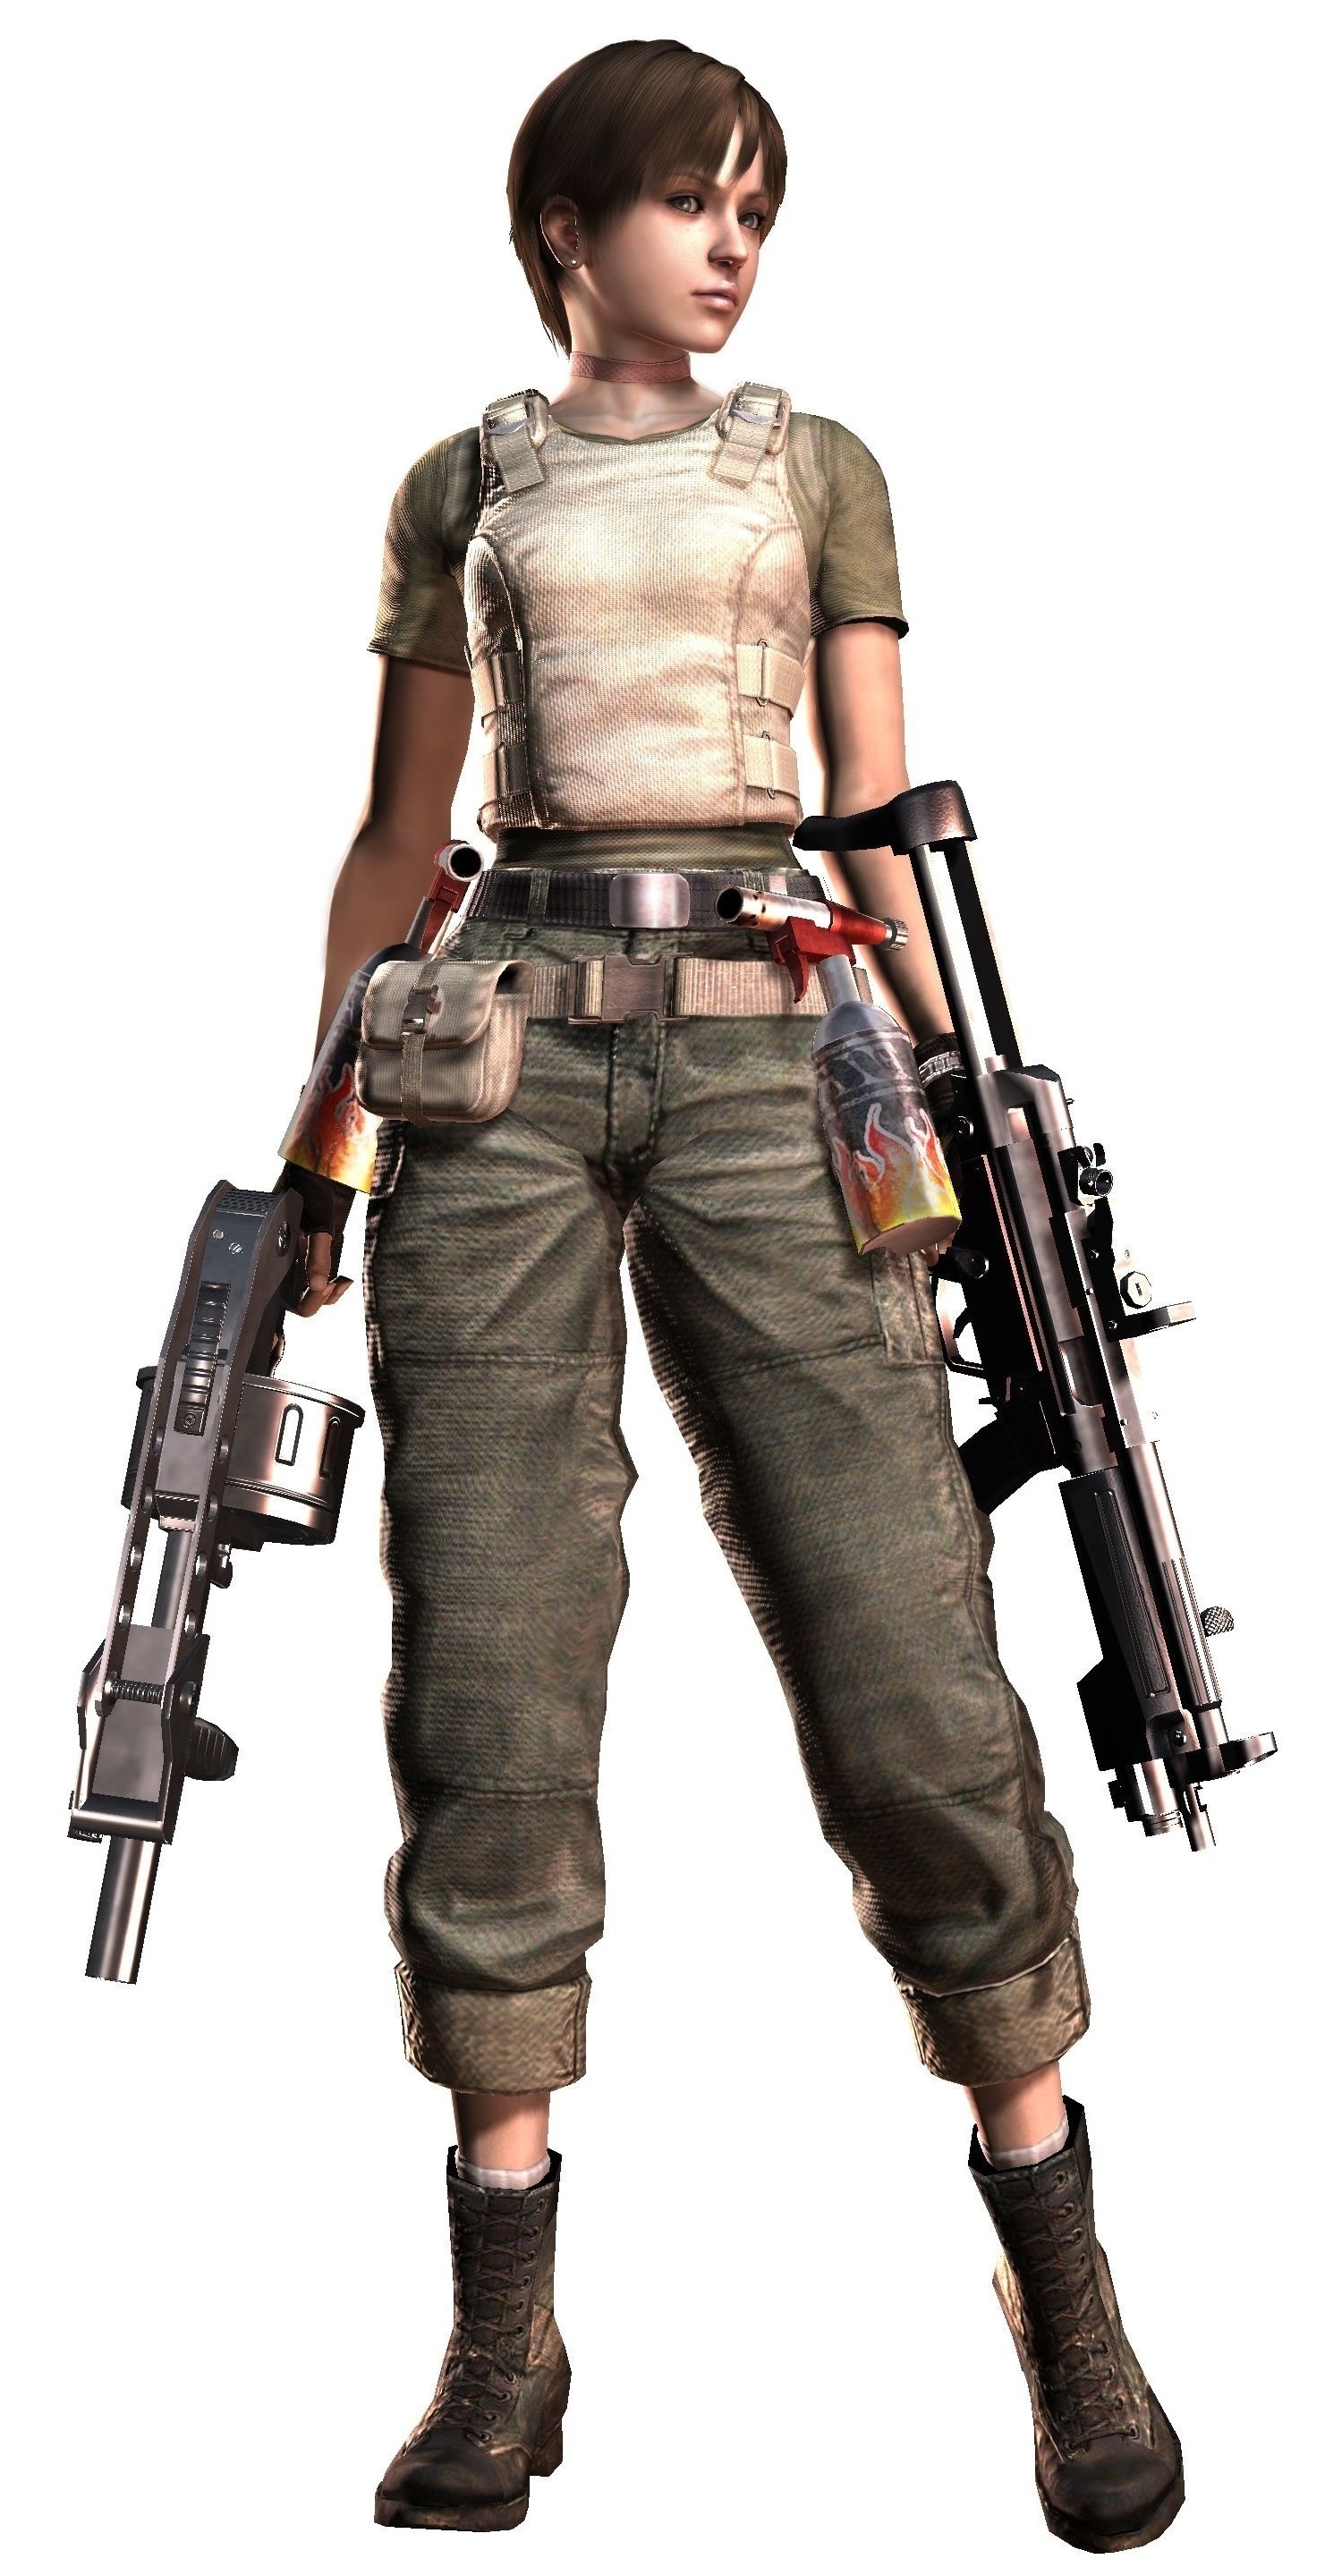 Of Rebecca Chambers' main appearances, which is most iconic in your  opinion? | ResetEra